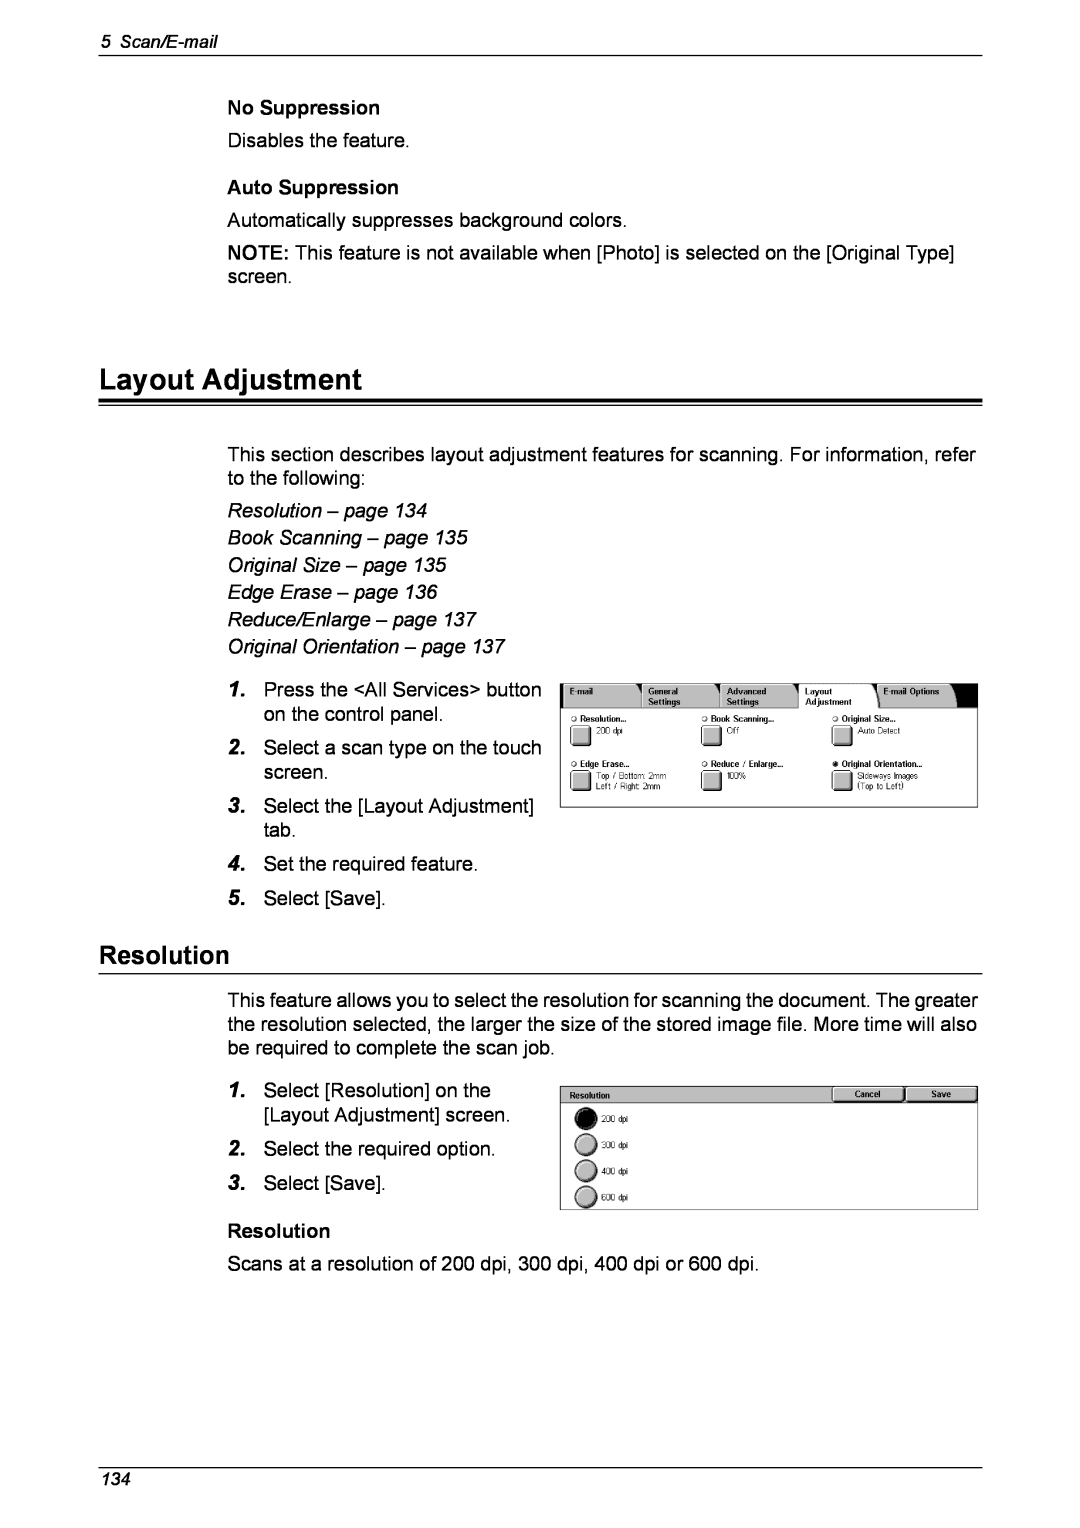 Xerox 5230 manual Resolution – page Book Scanning – page, Original Size – page Edge Erase – page, Layout Adjustment 